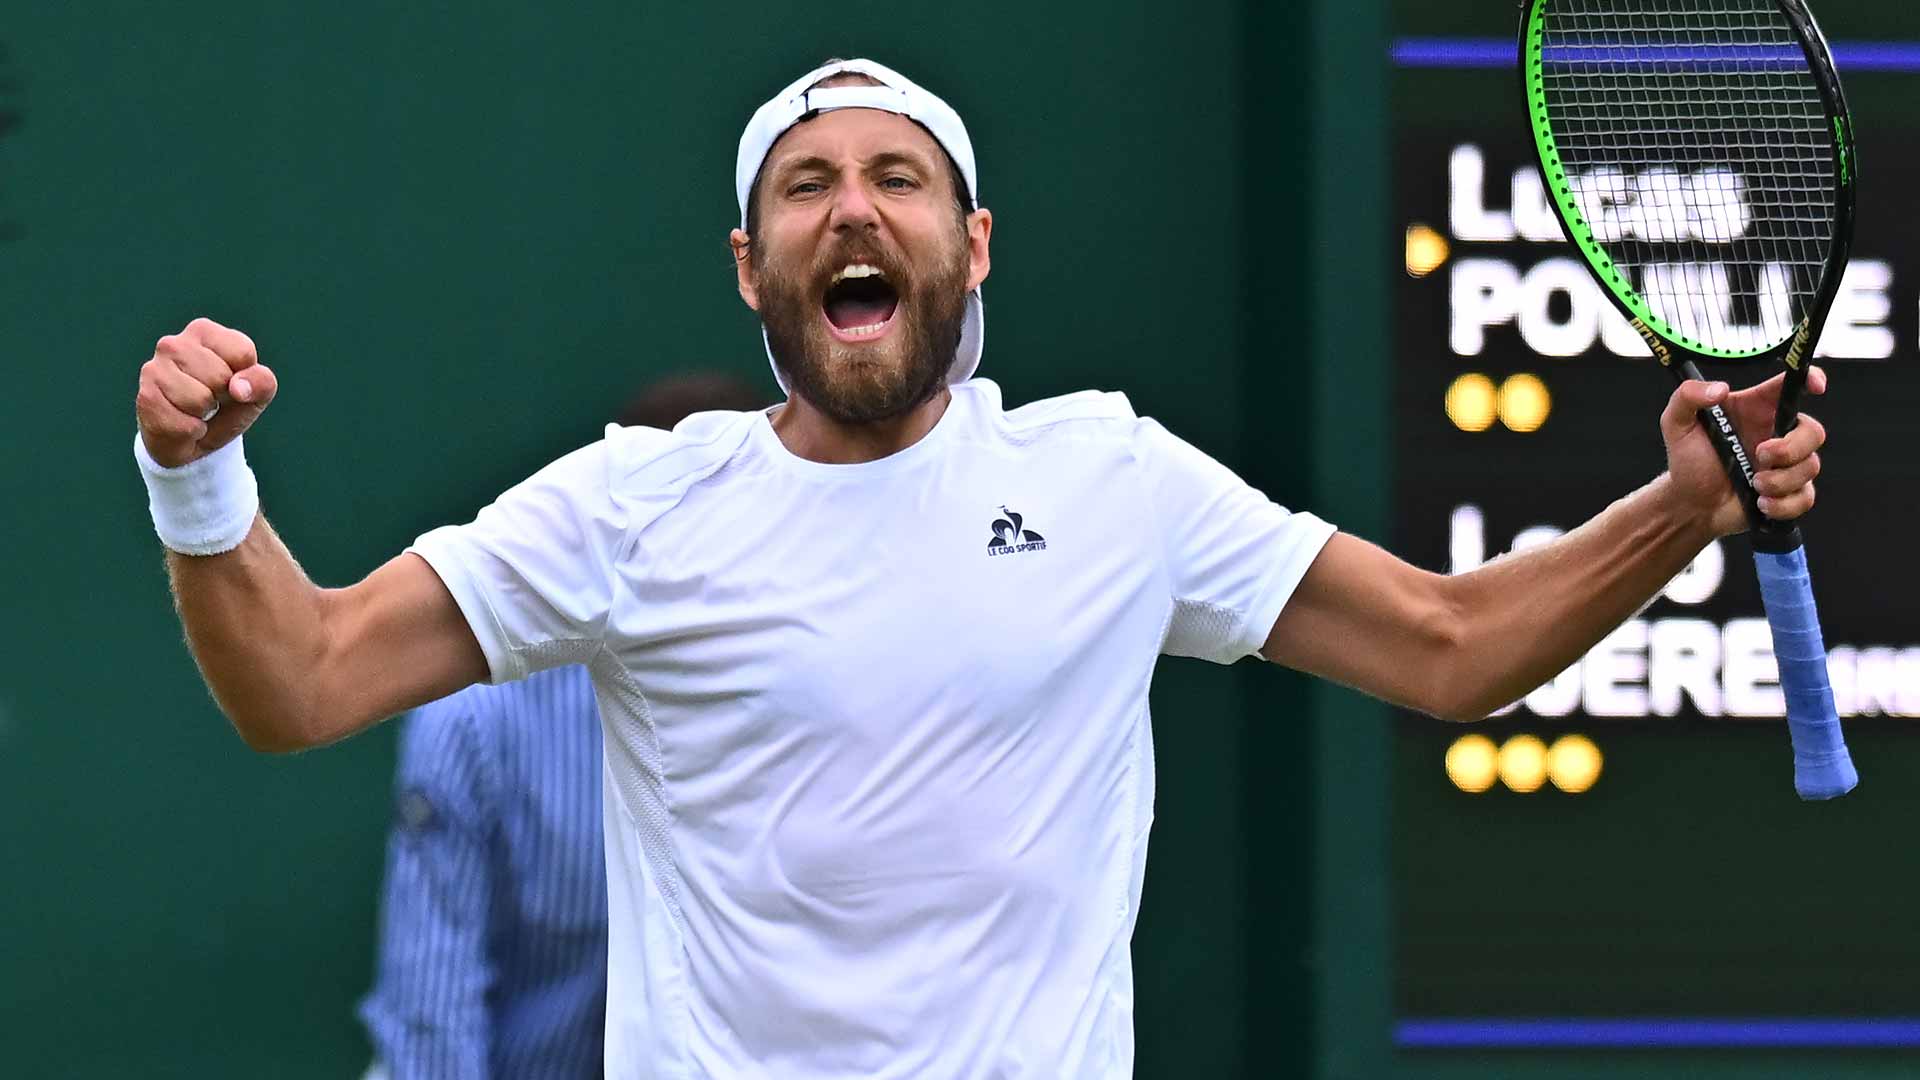 'When you do that you lose!' Pouille, inspired by daughter, shining at Wimbledon again